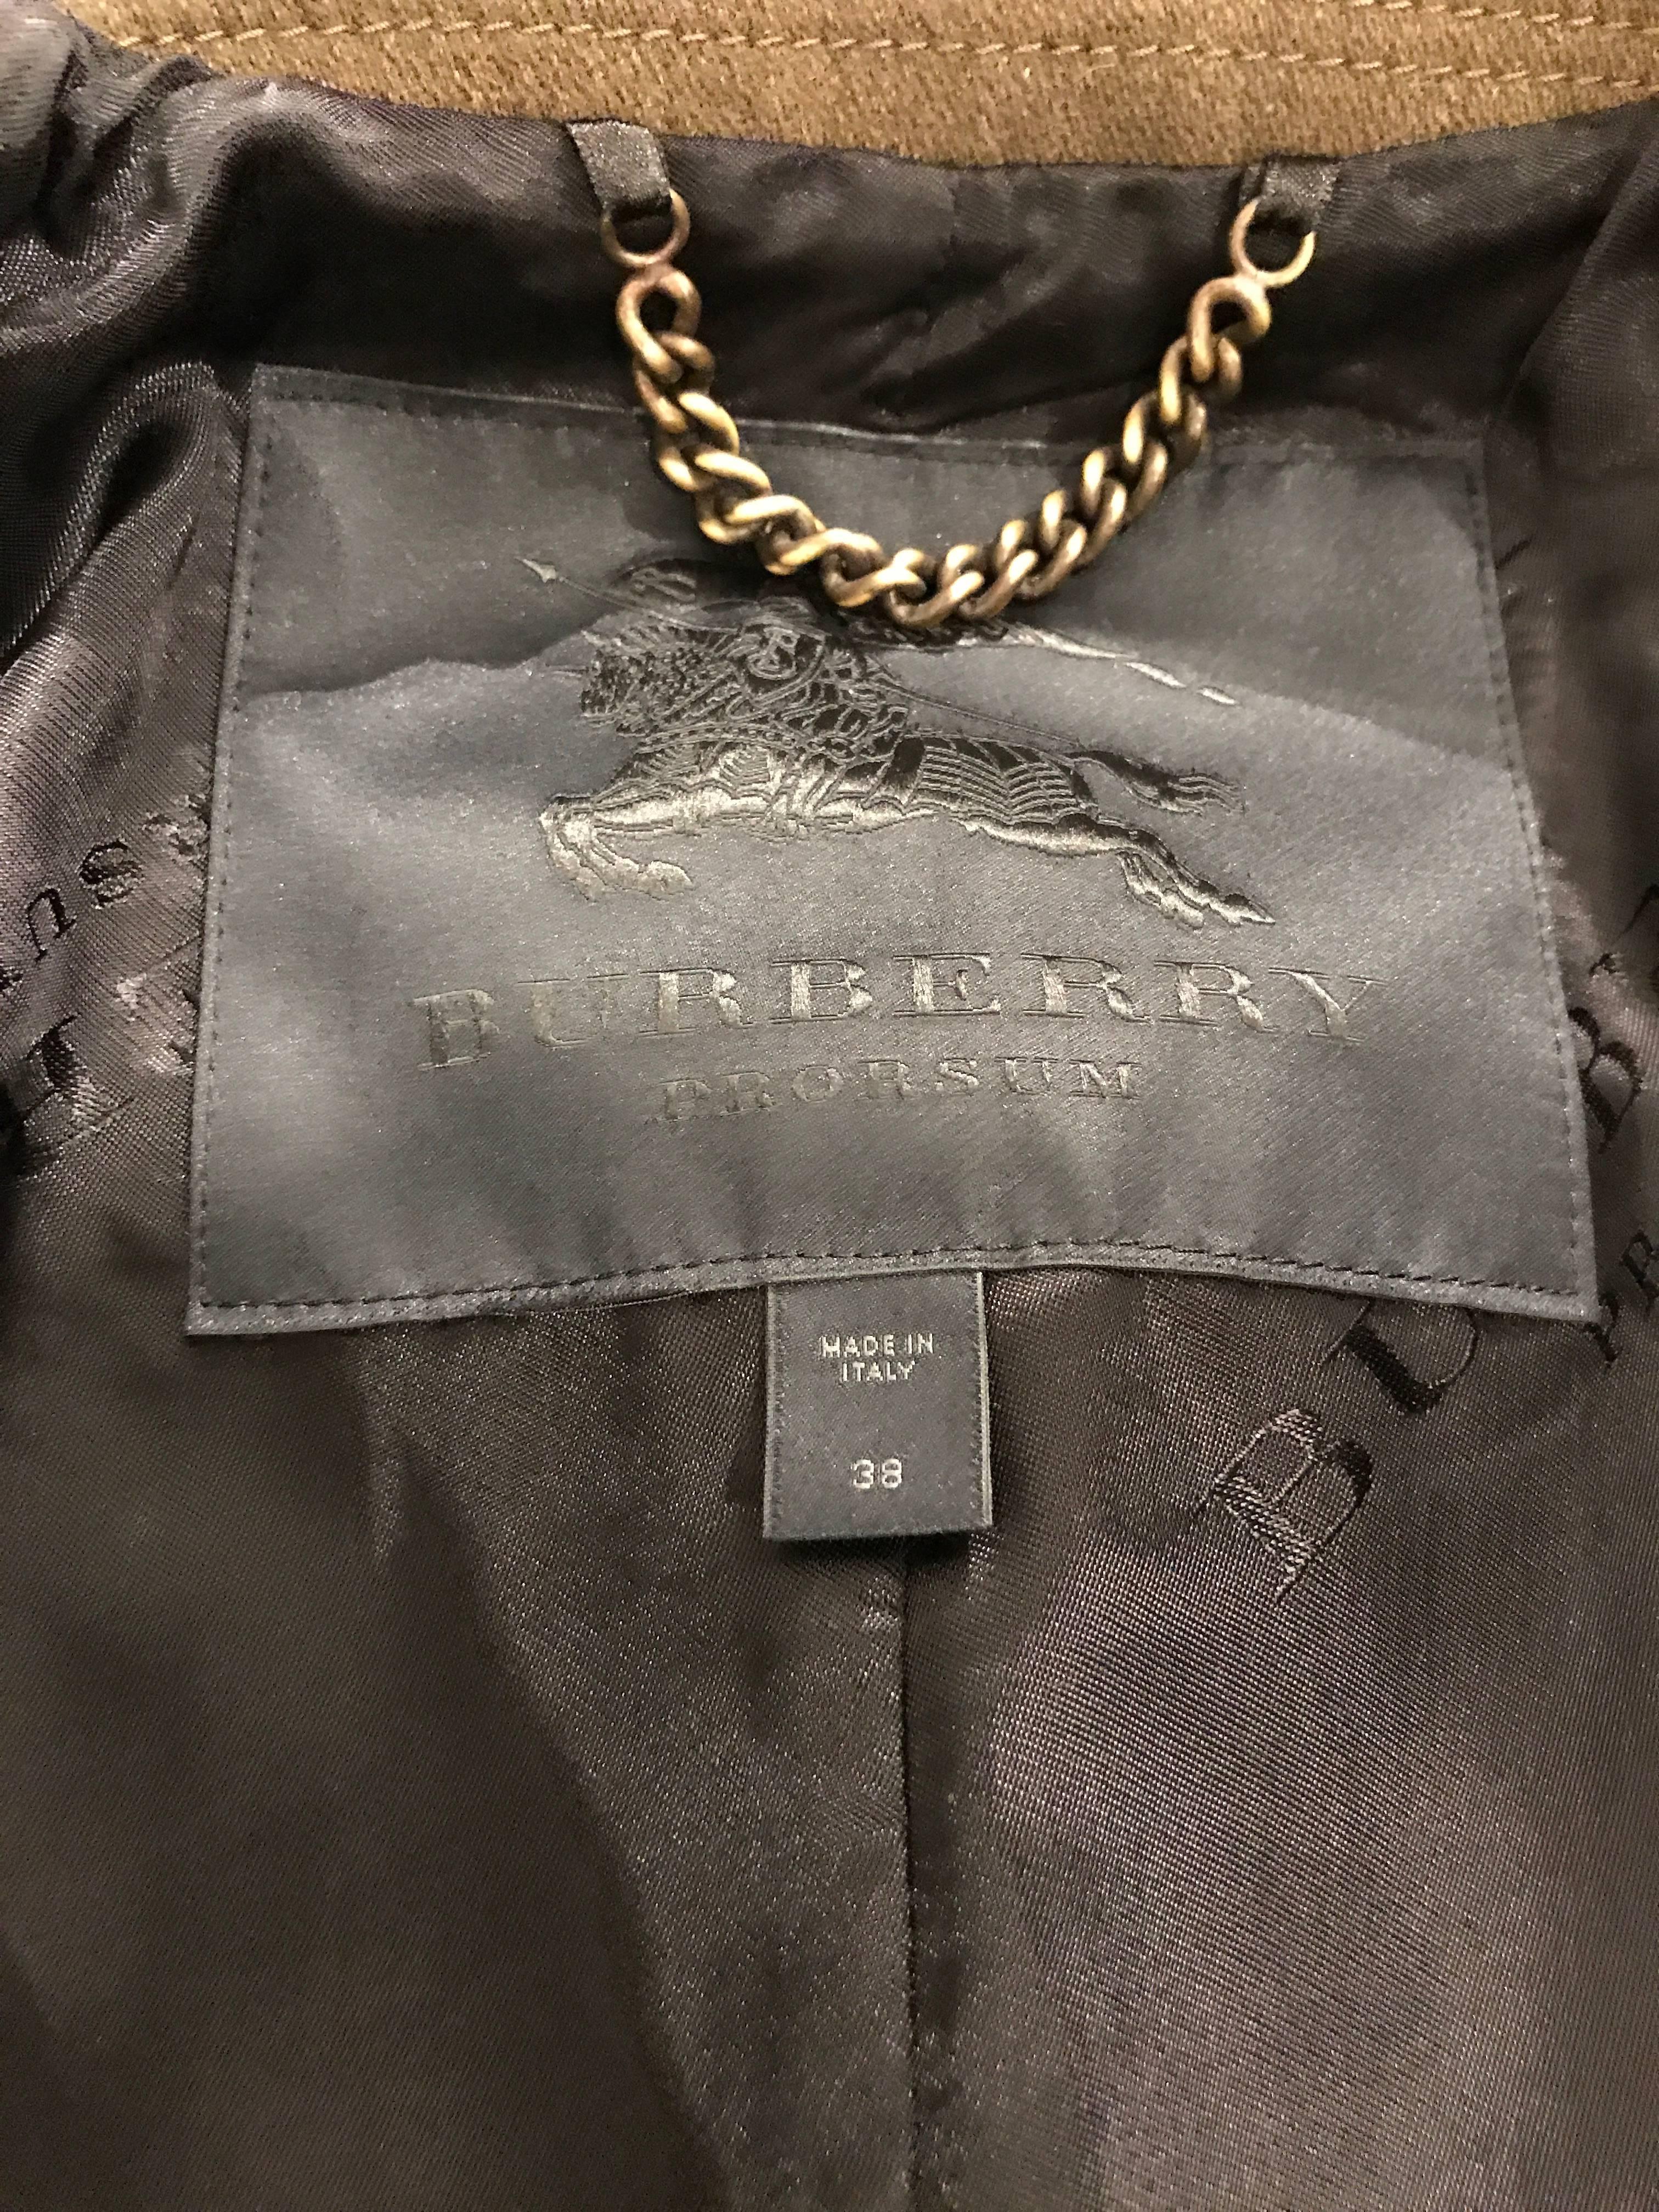 Burberry Prorsum Army Green Wool Coat With Black Shearling Skirt Sz 38 (Us2) For Sale 3